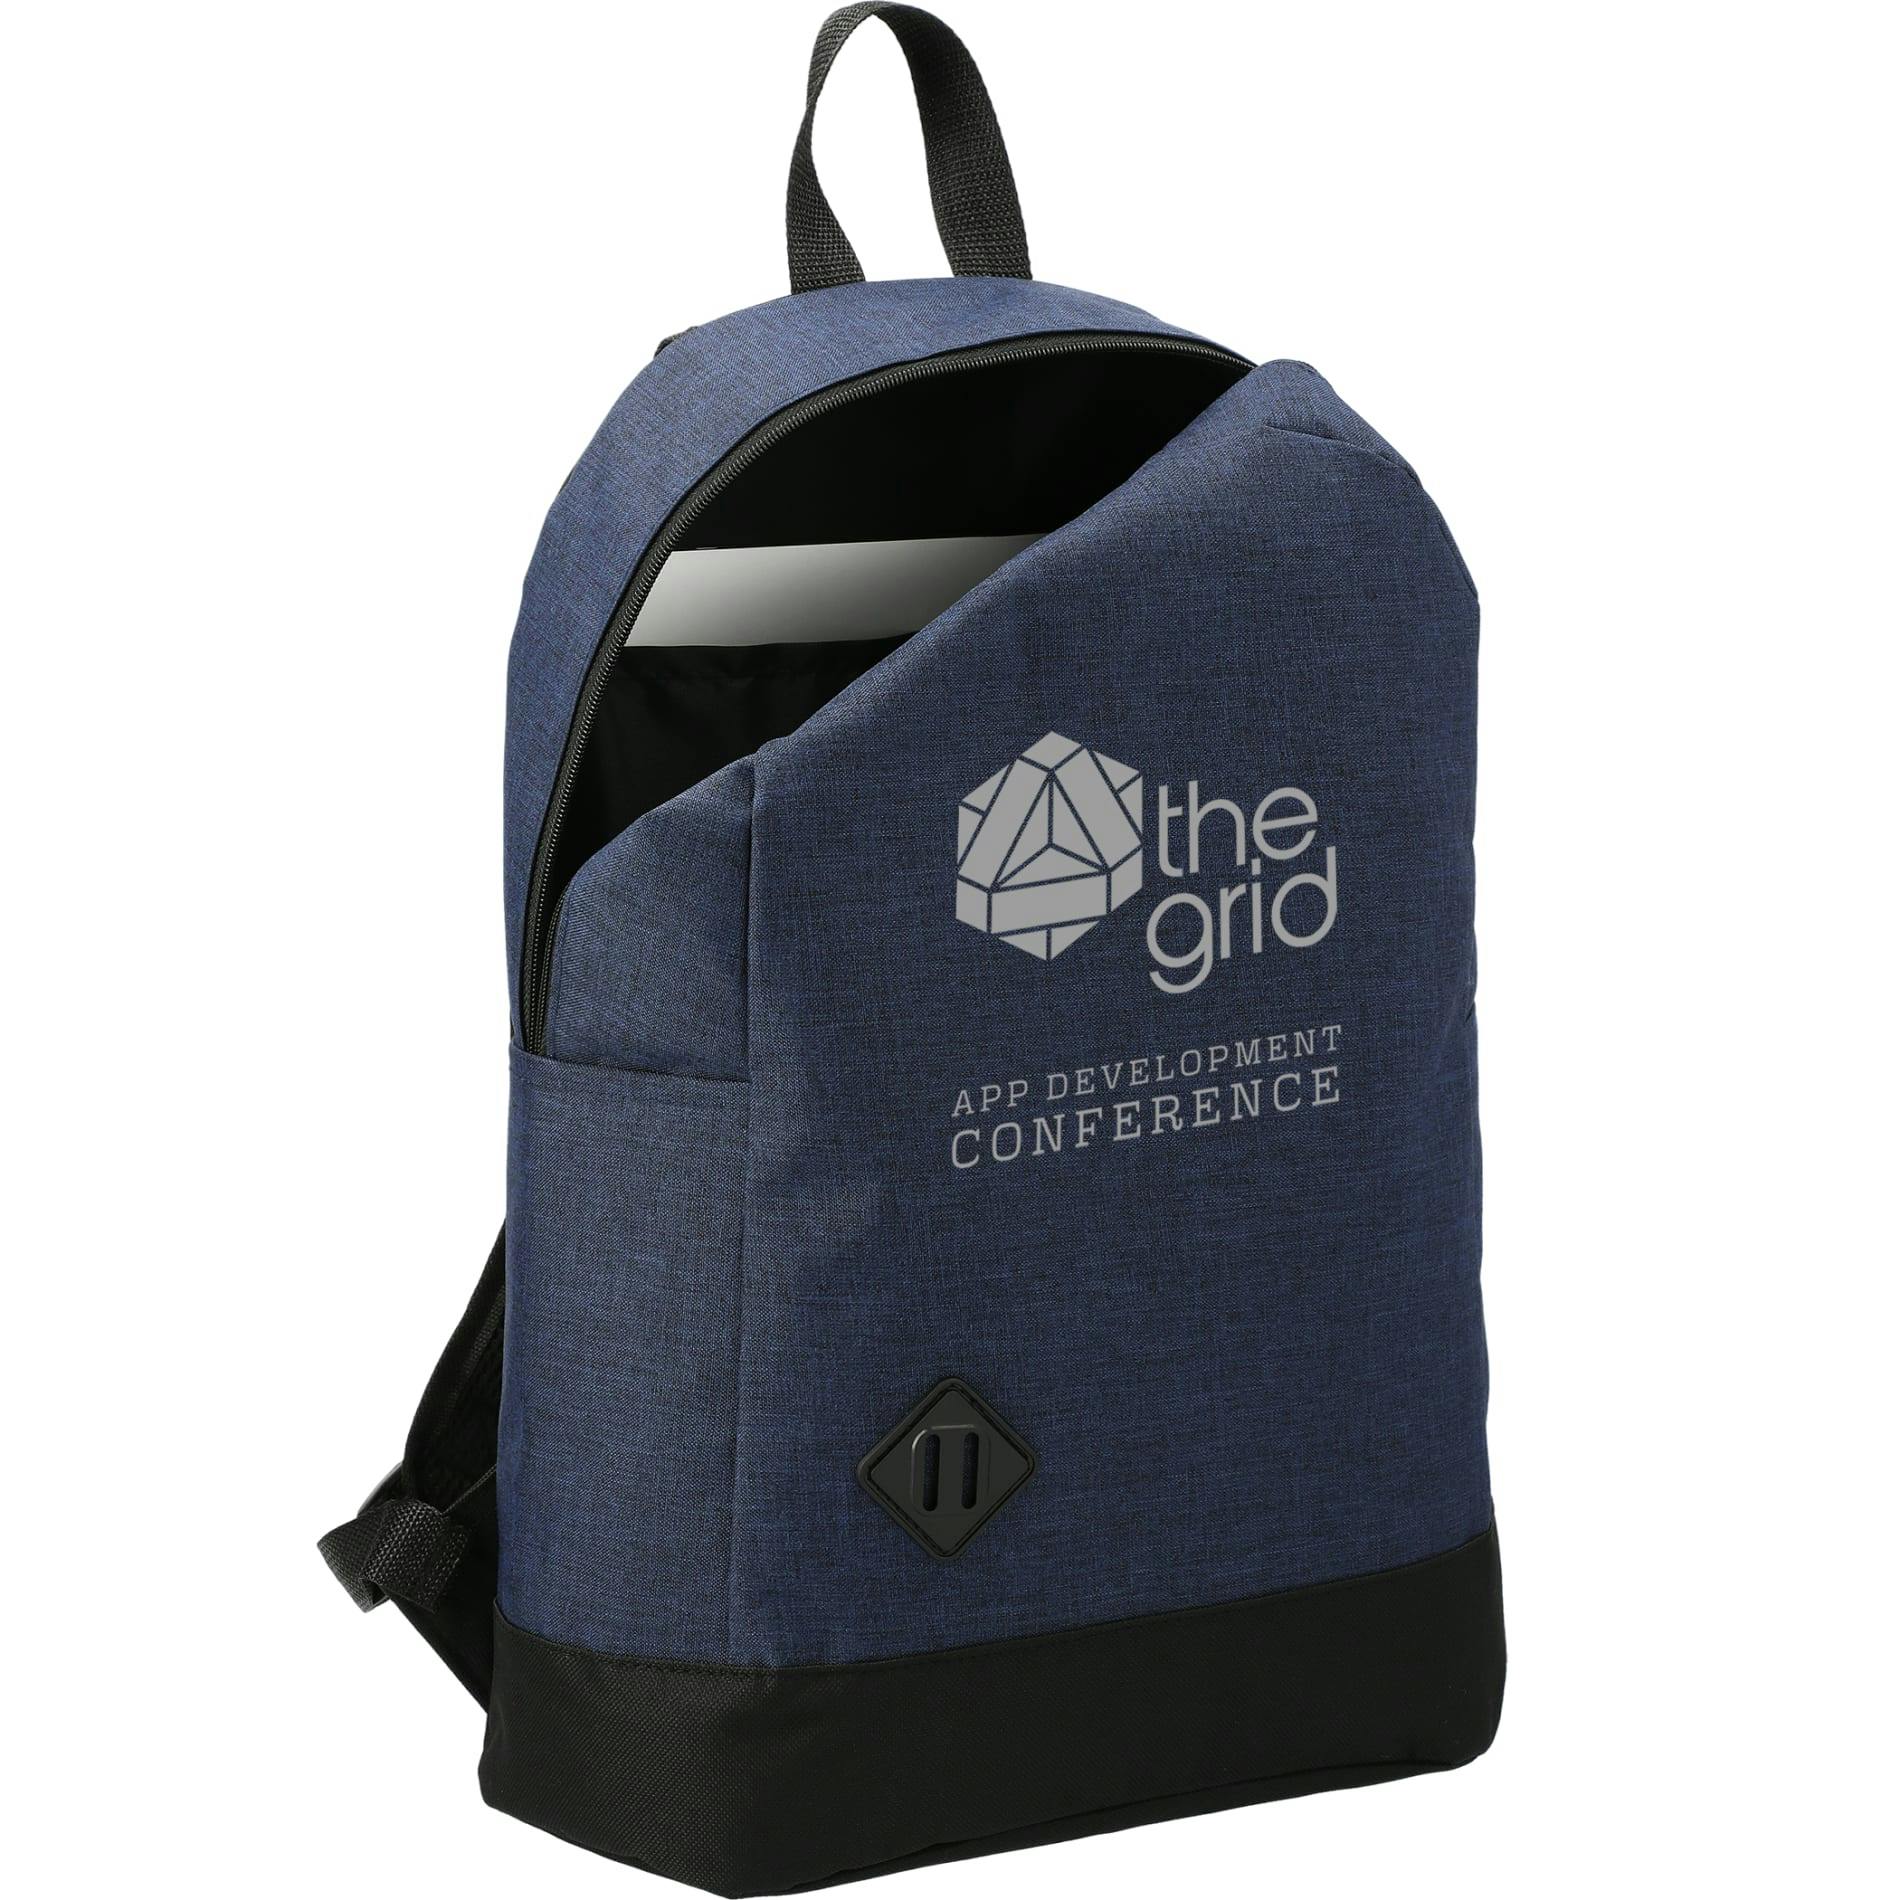 Graphite Dome 15" Computer Backpack - additional Image 4